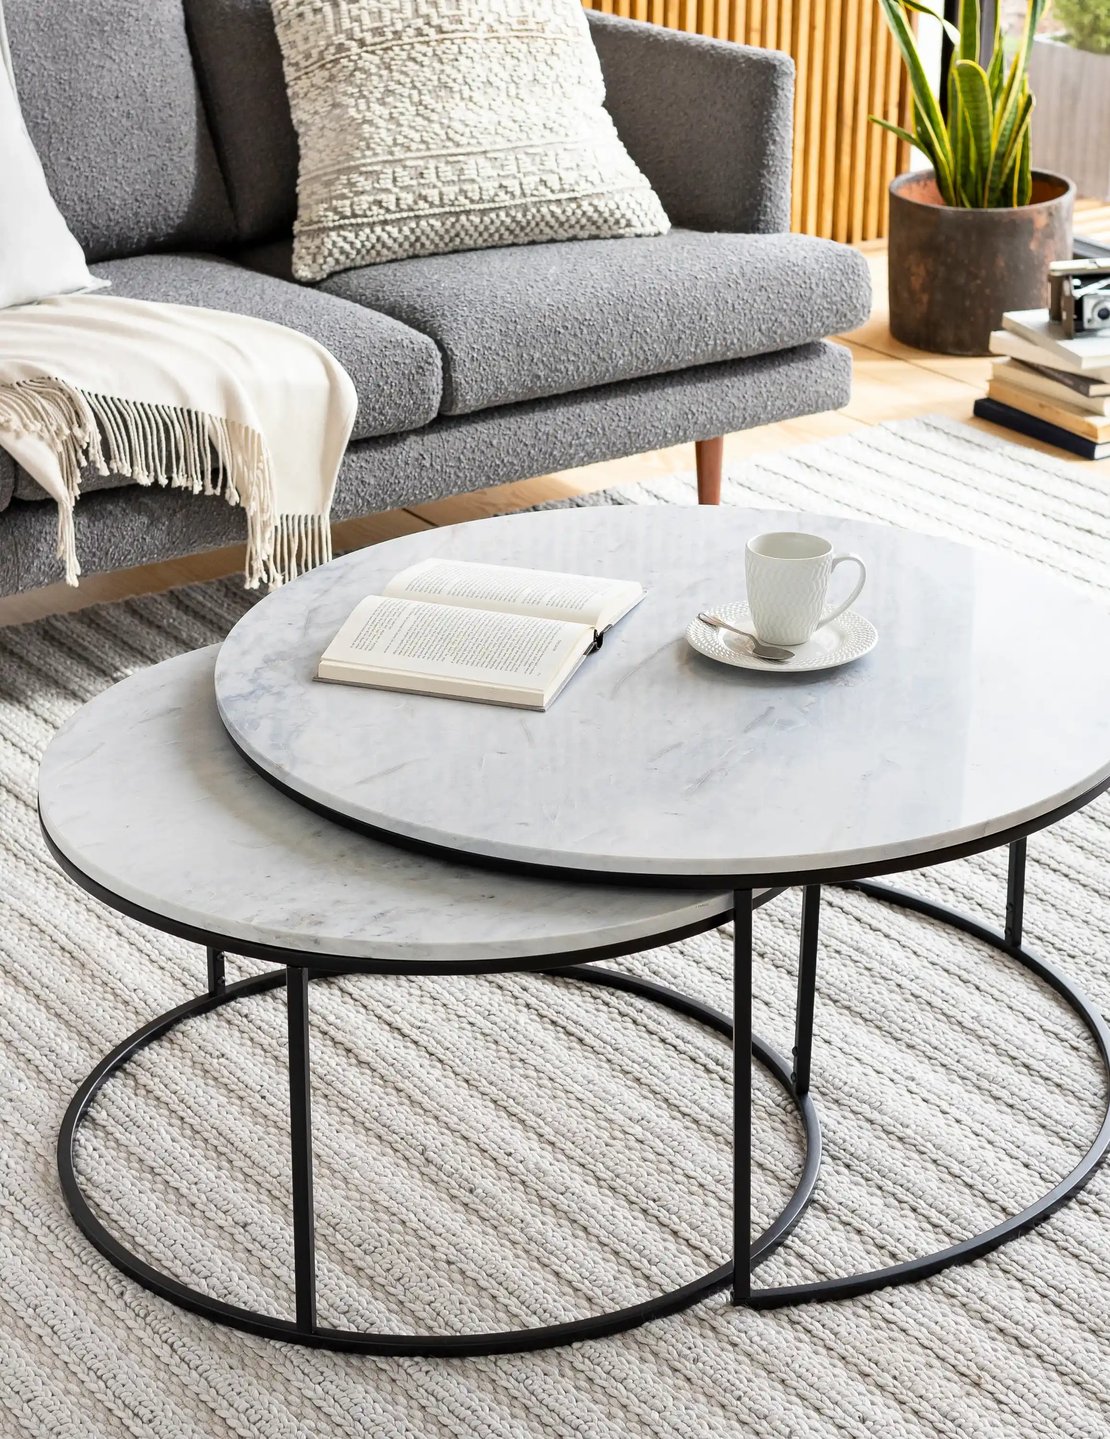 Two nesting round marble coffee tables on stop of a natural rug.